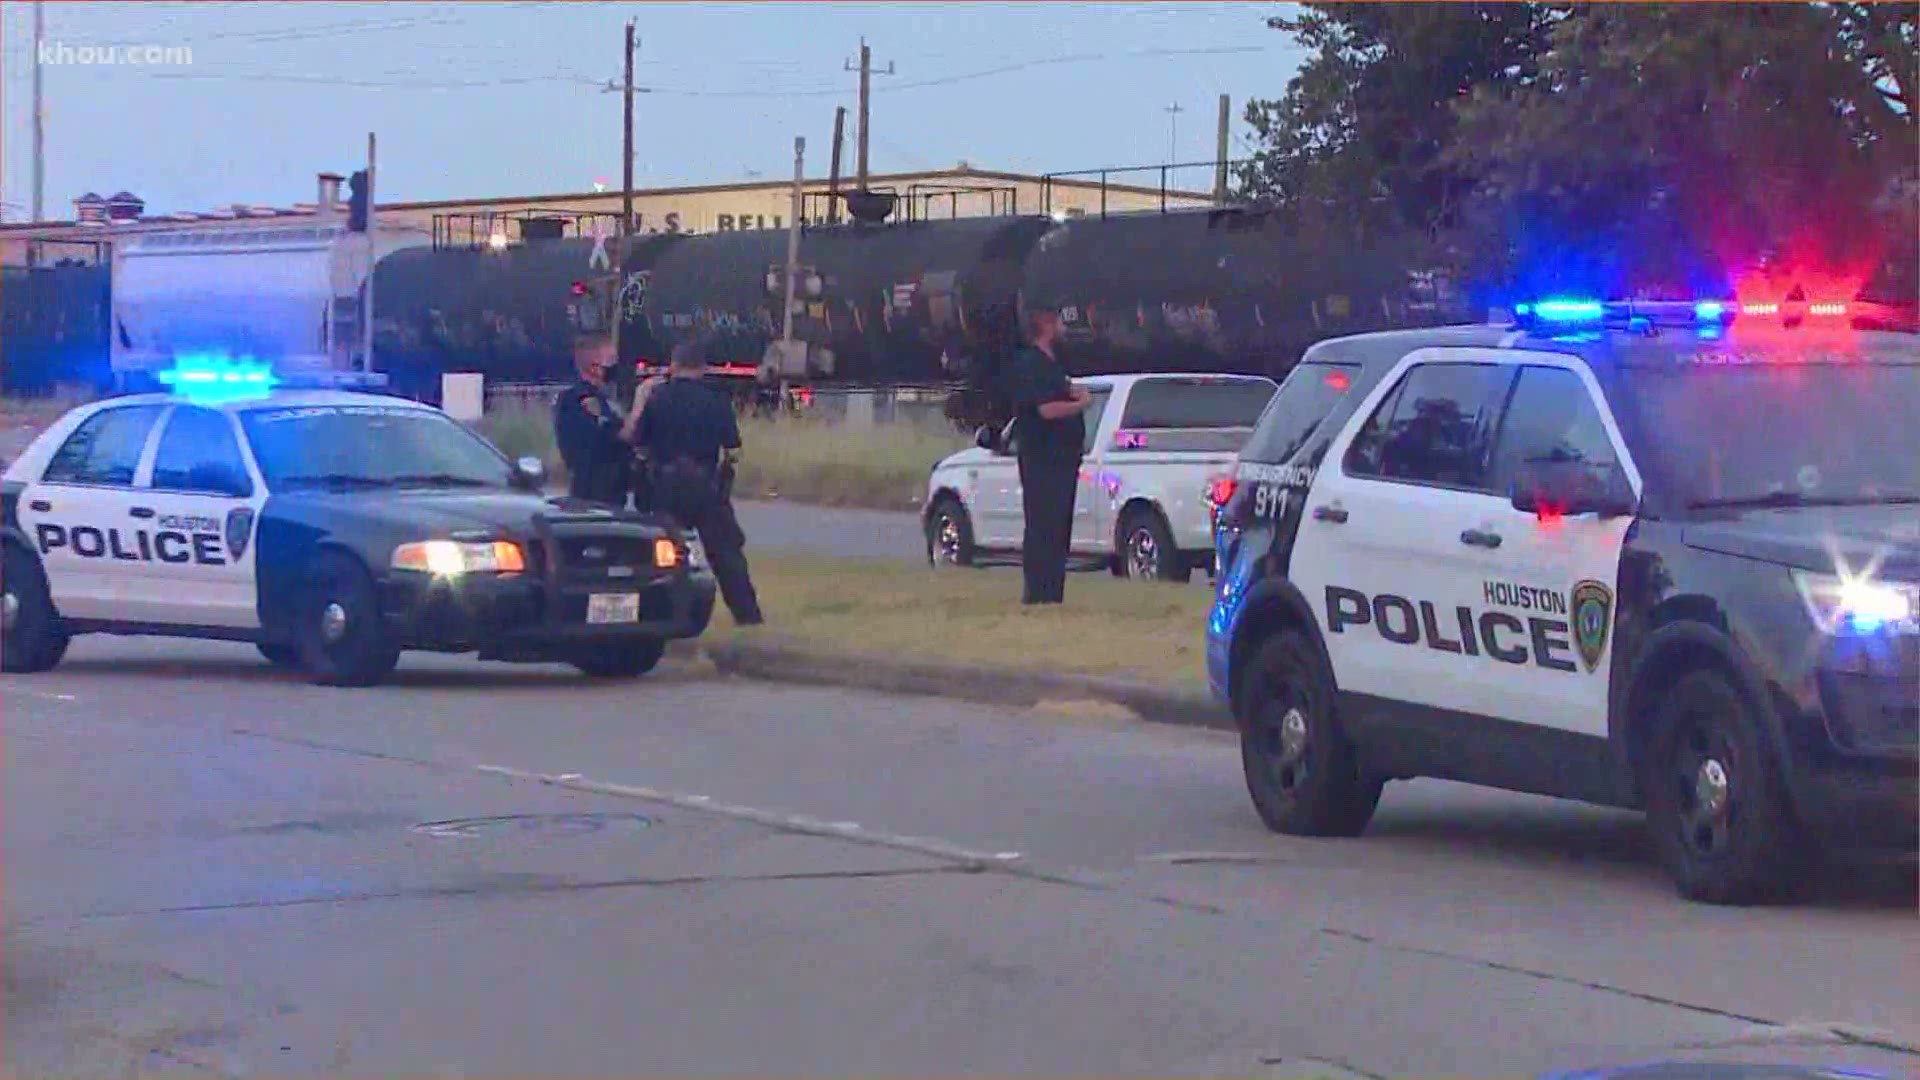 Police are investigating, but KHOU 11's Michelle Choi reports the driver involved stayed at the scene.